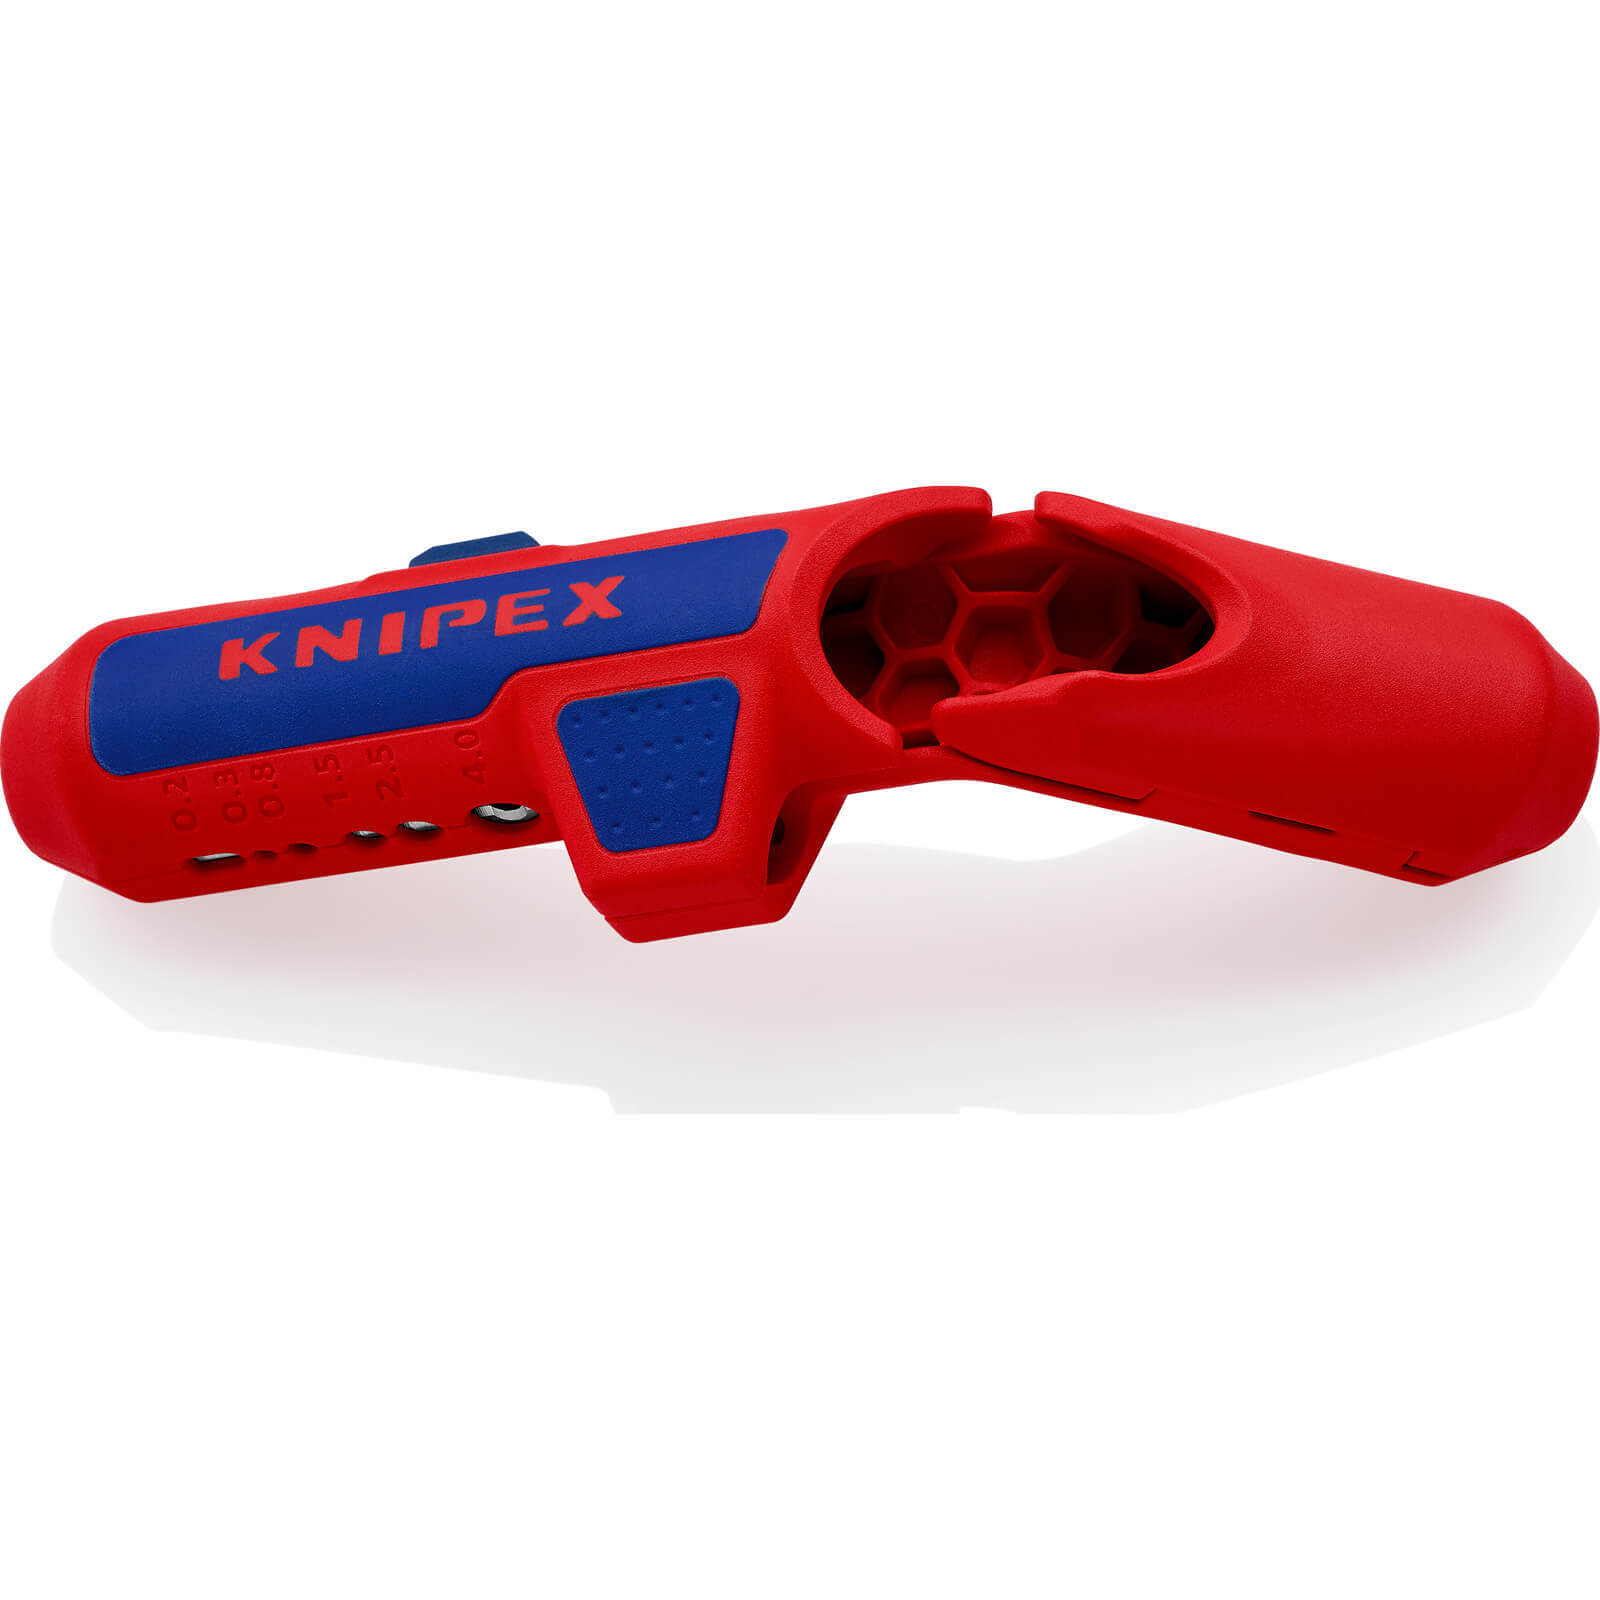 Knipex 6 95 Ergostrip Universal Cable Stripping Tool